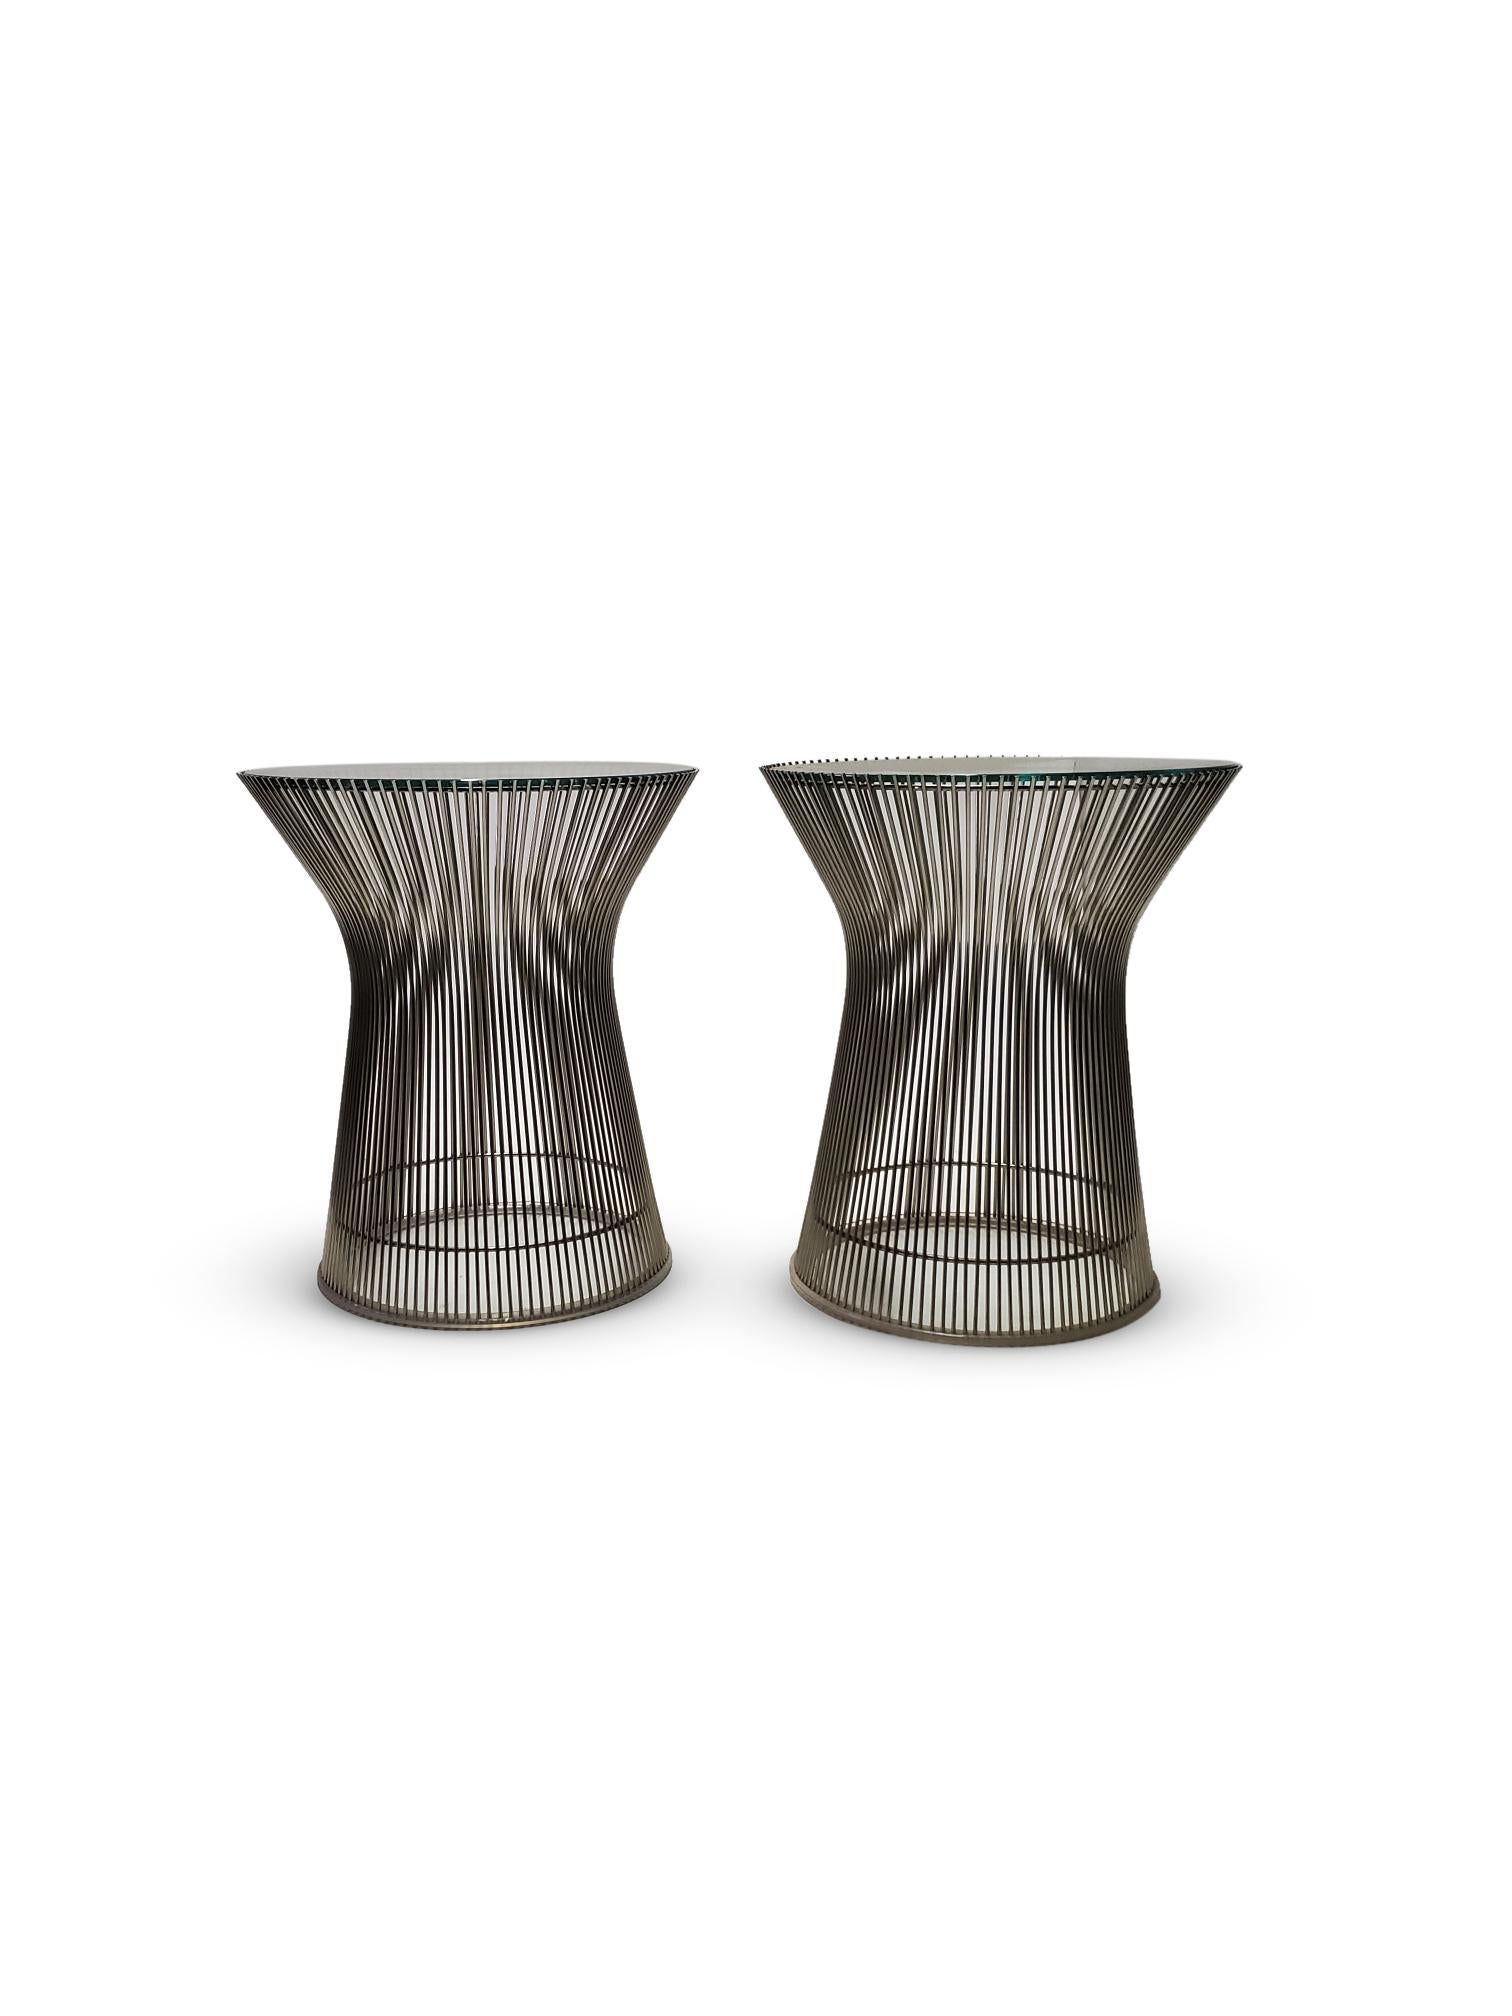 American Pair of Warren Platner for Knoll Side / End Tables  For Sale